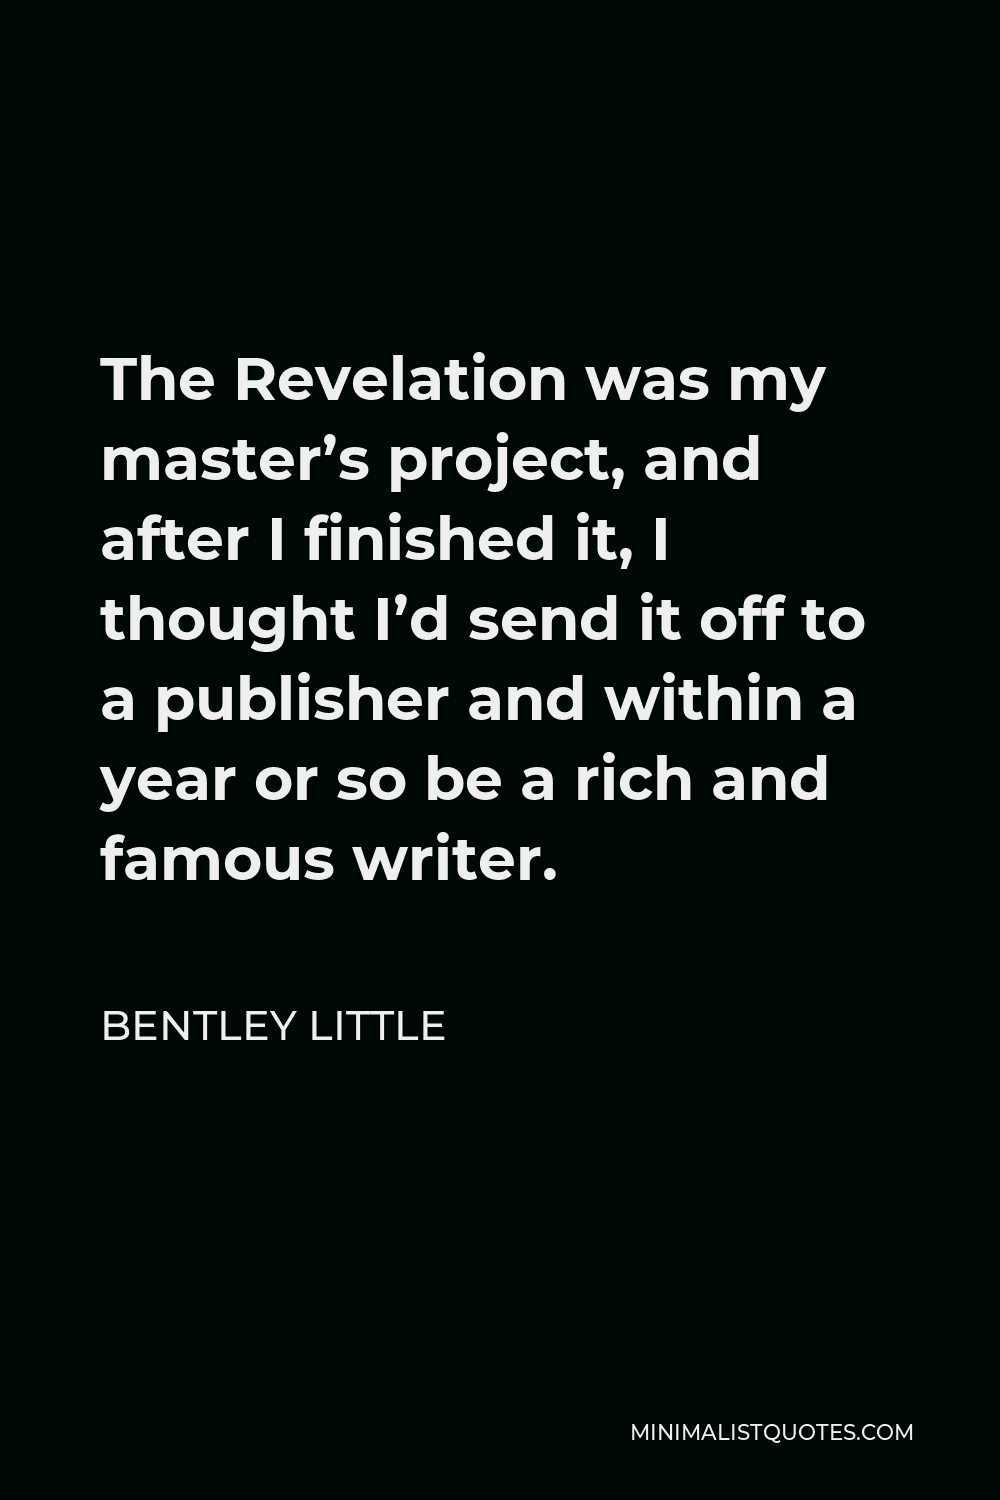 Bentley Little Quote - The Revelation was my master’s project, and after I finished it, I thought I’d send it off to a publisher and within a year or so be a rich and famous writer.